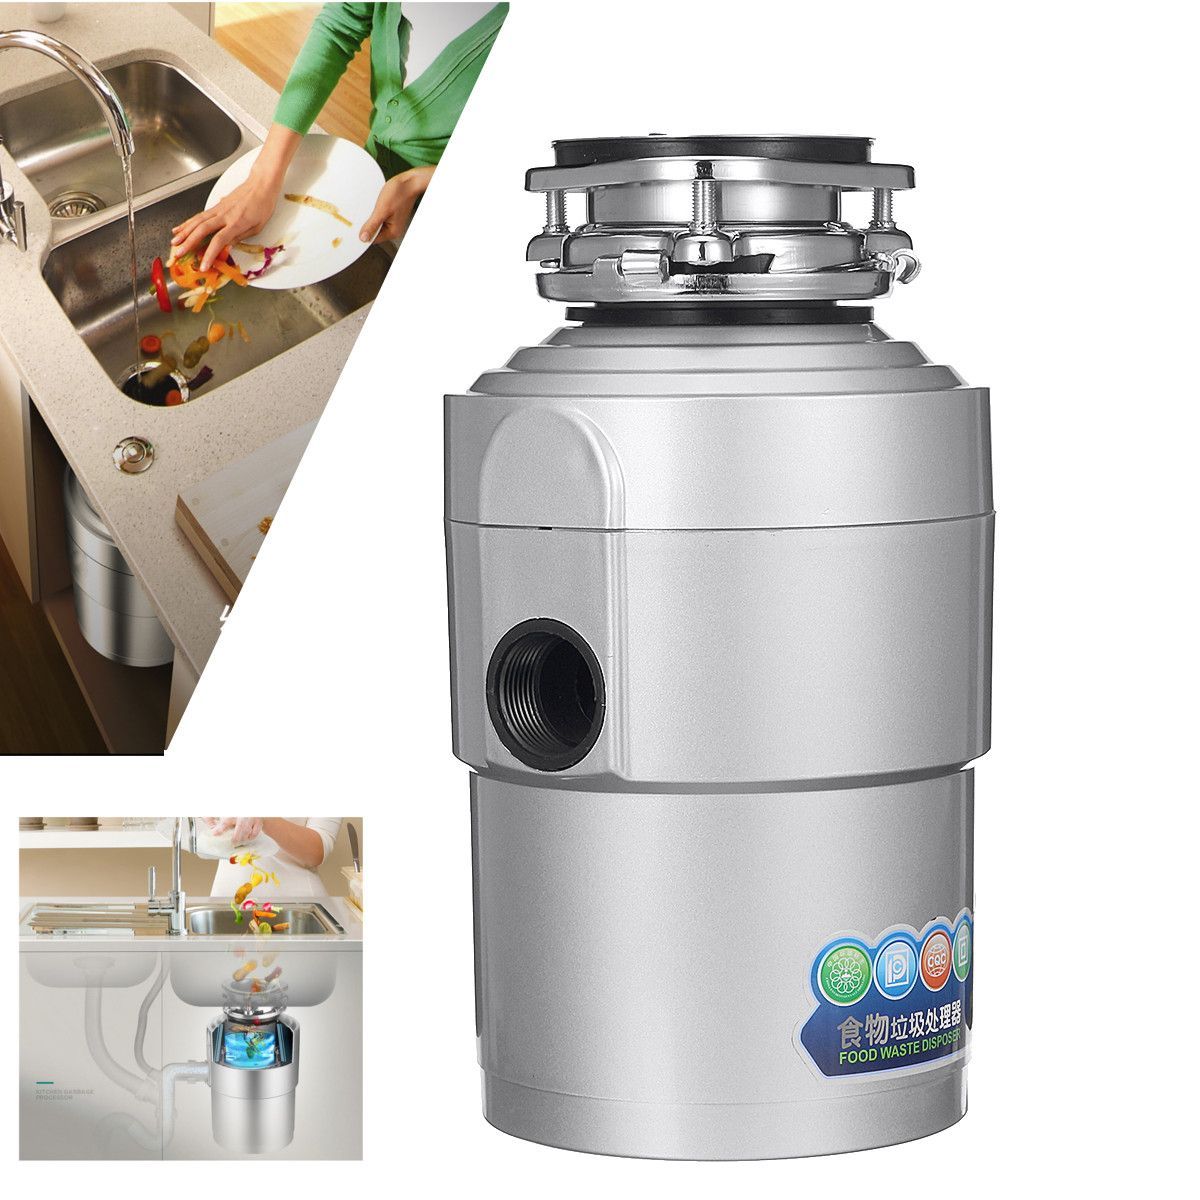 Garbage-Disposal-10-HP-Continuous-Feed-Home-Kitchen-Food-Waste-2600-RPM-1545839